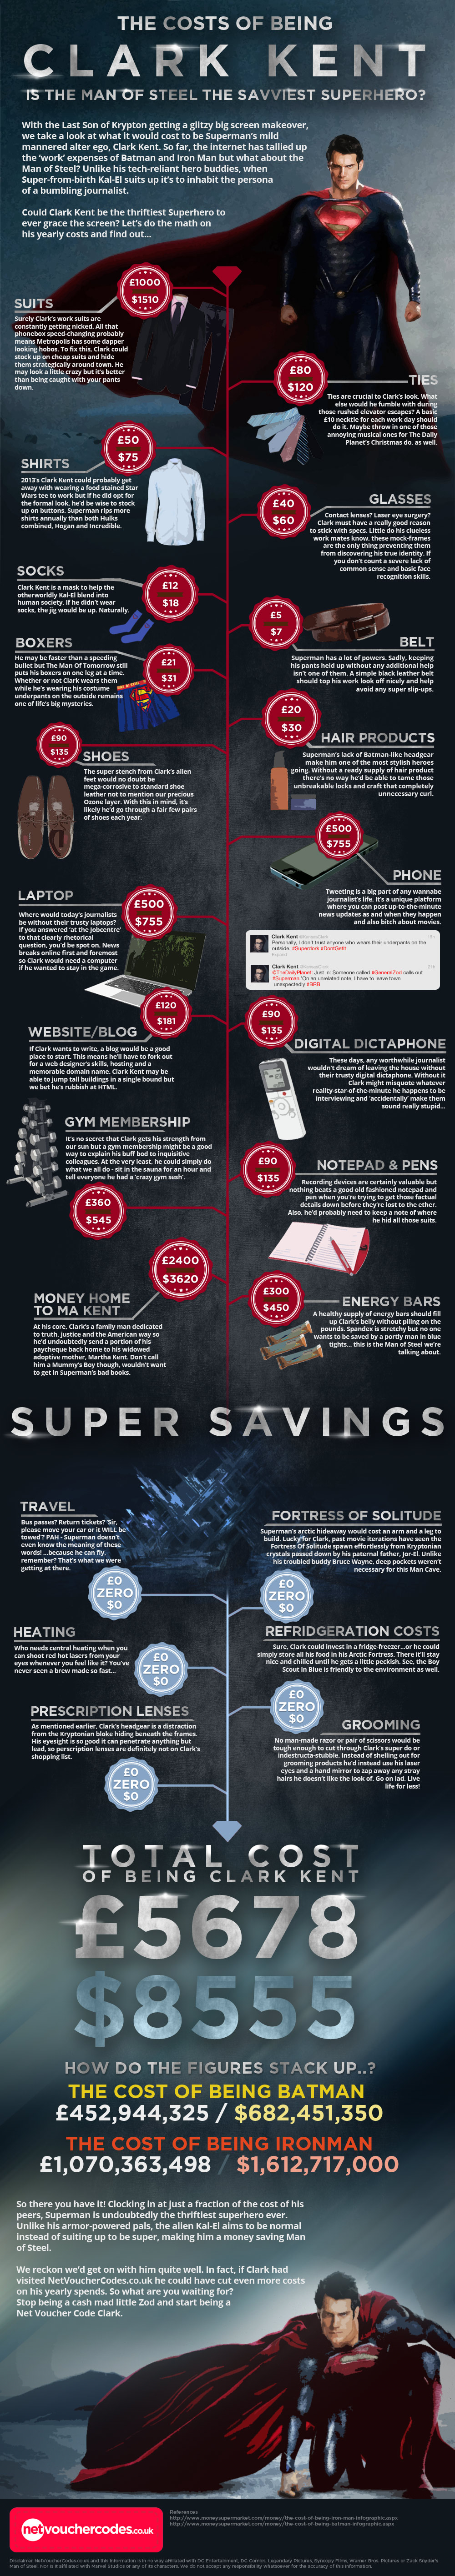 The Cost of Being Clark Kent (Superman)